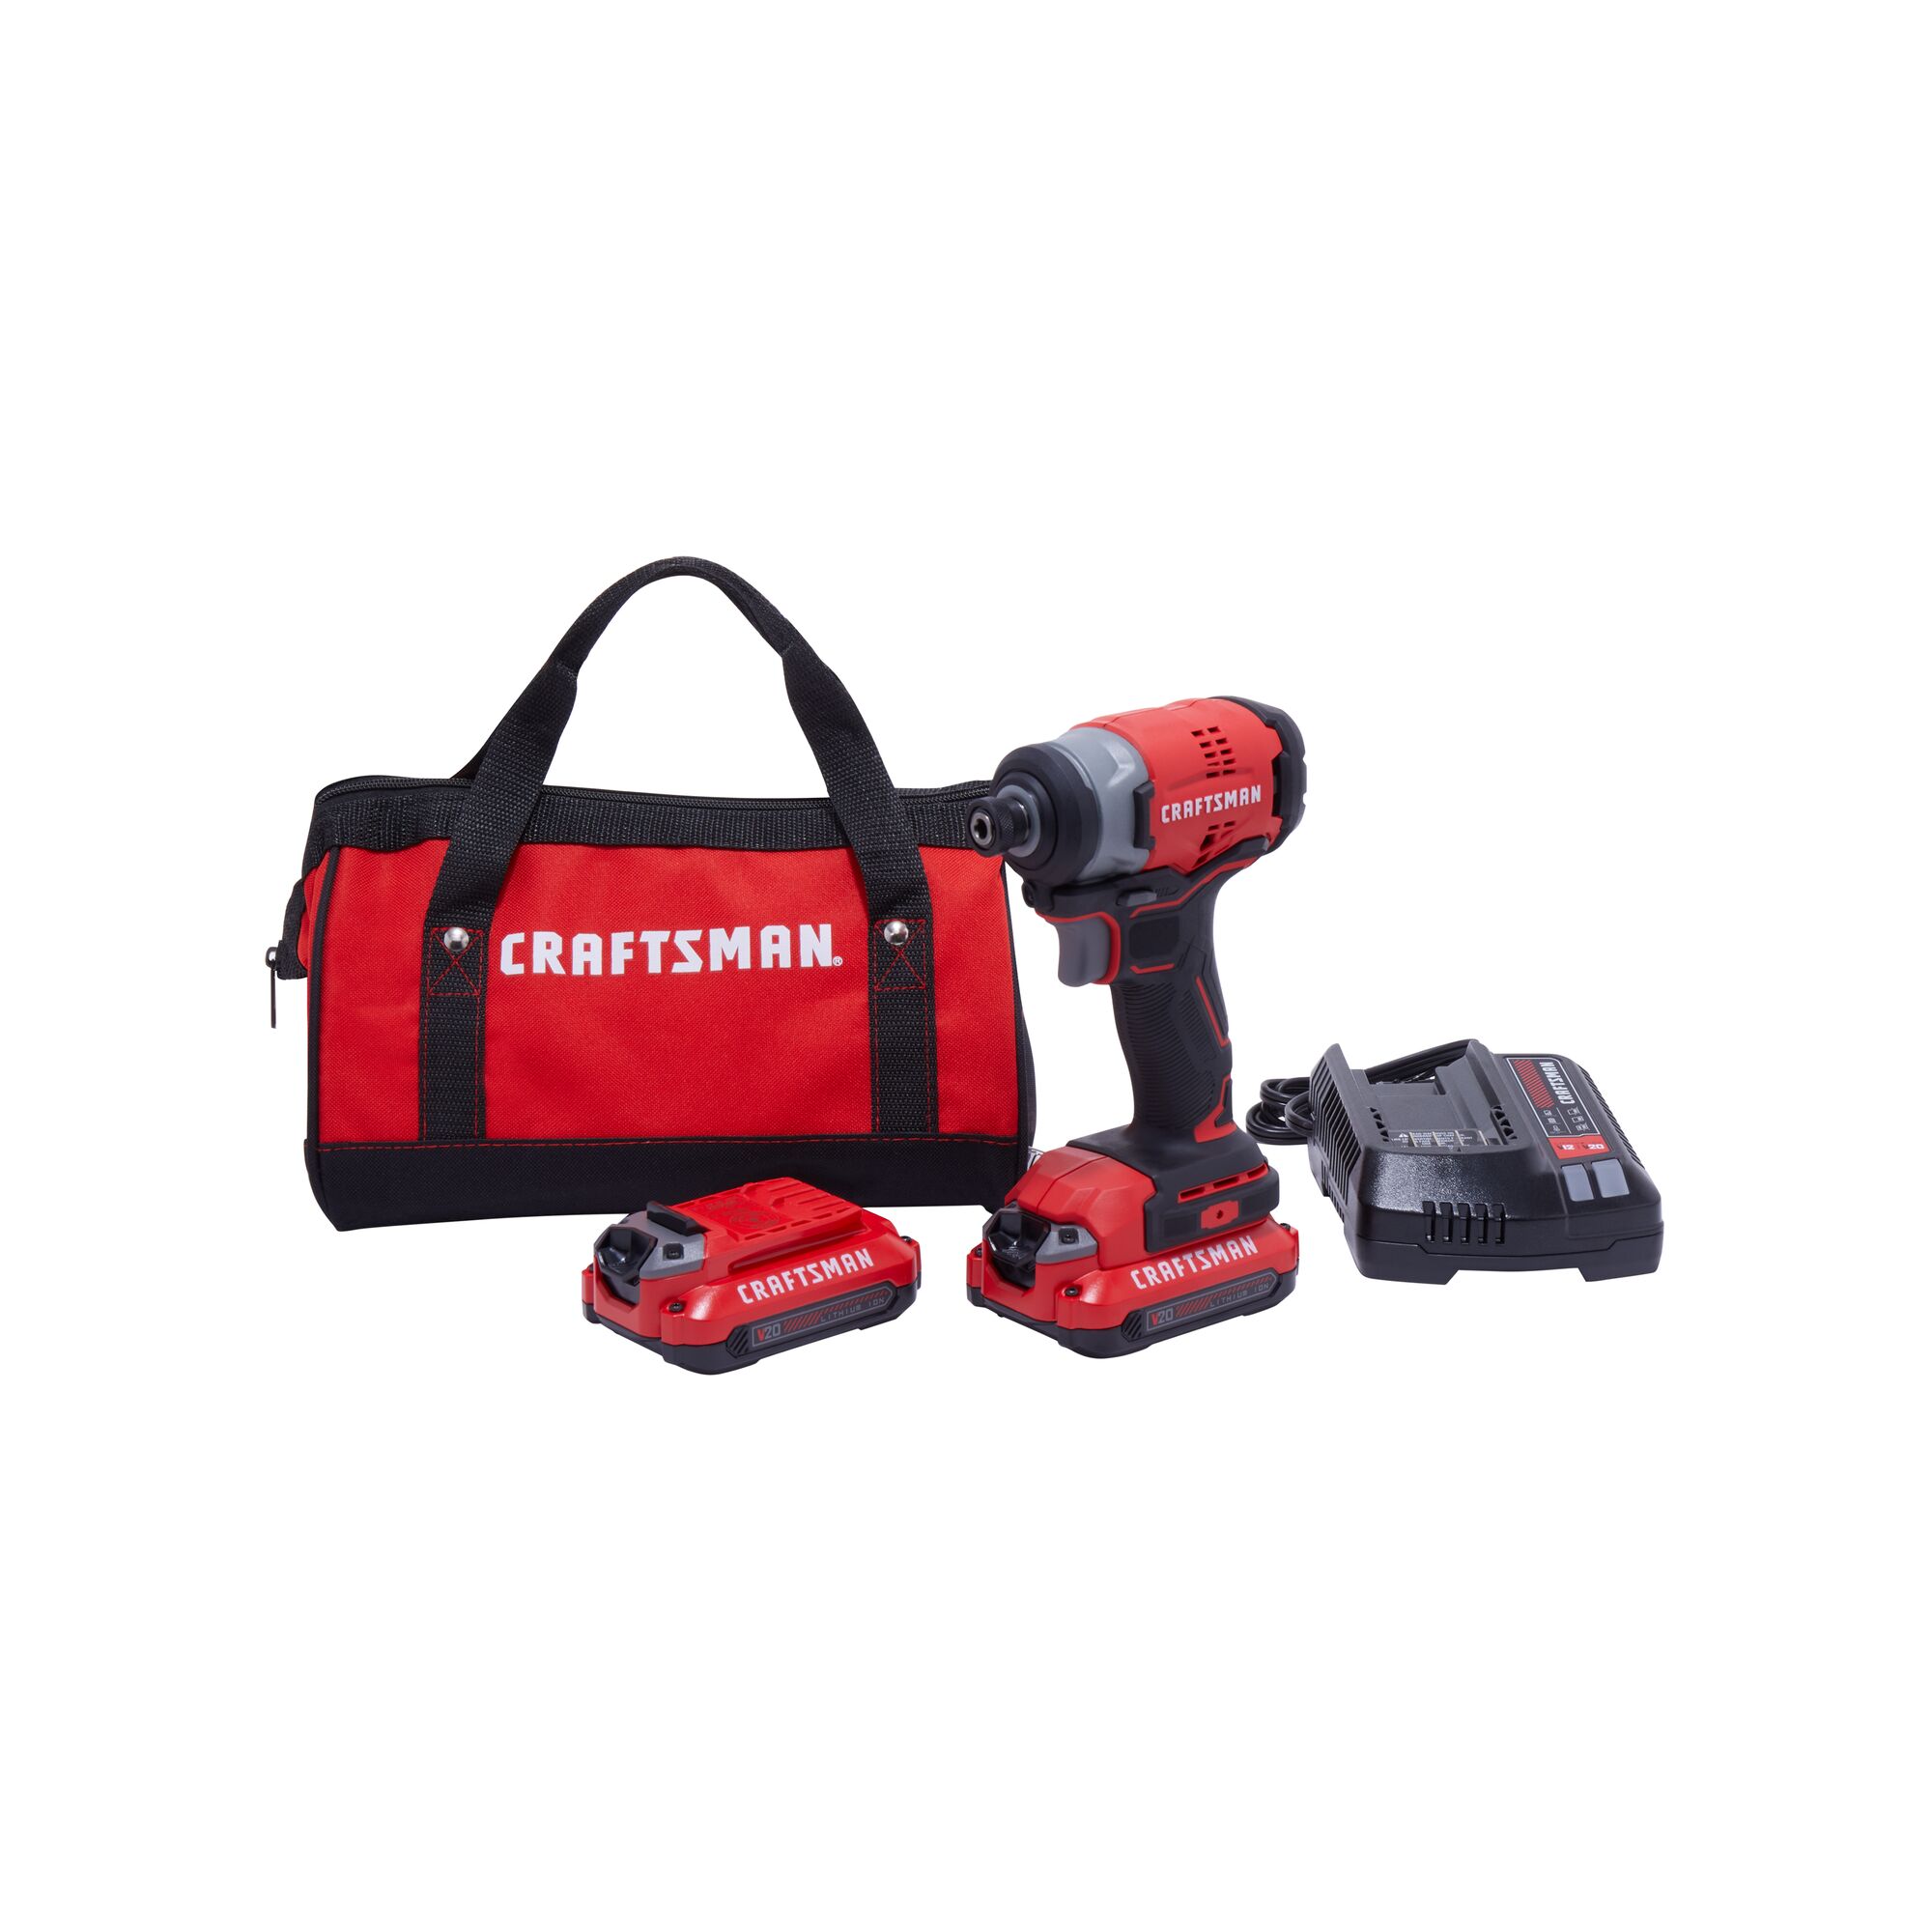 Front view of Craftsman 20V Max ¼ in. Brushless Cordless Impact Driver Kit with 2 Batteries.